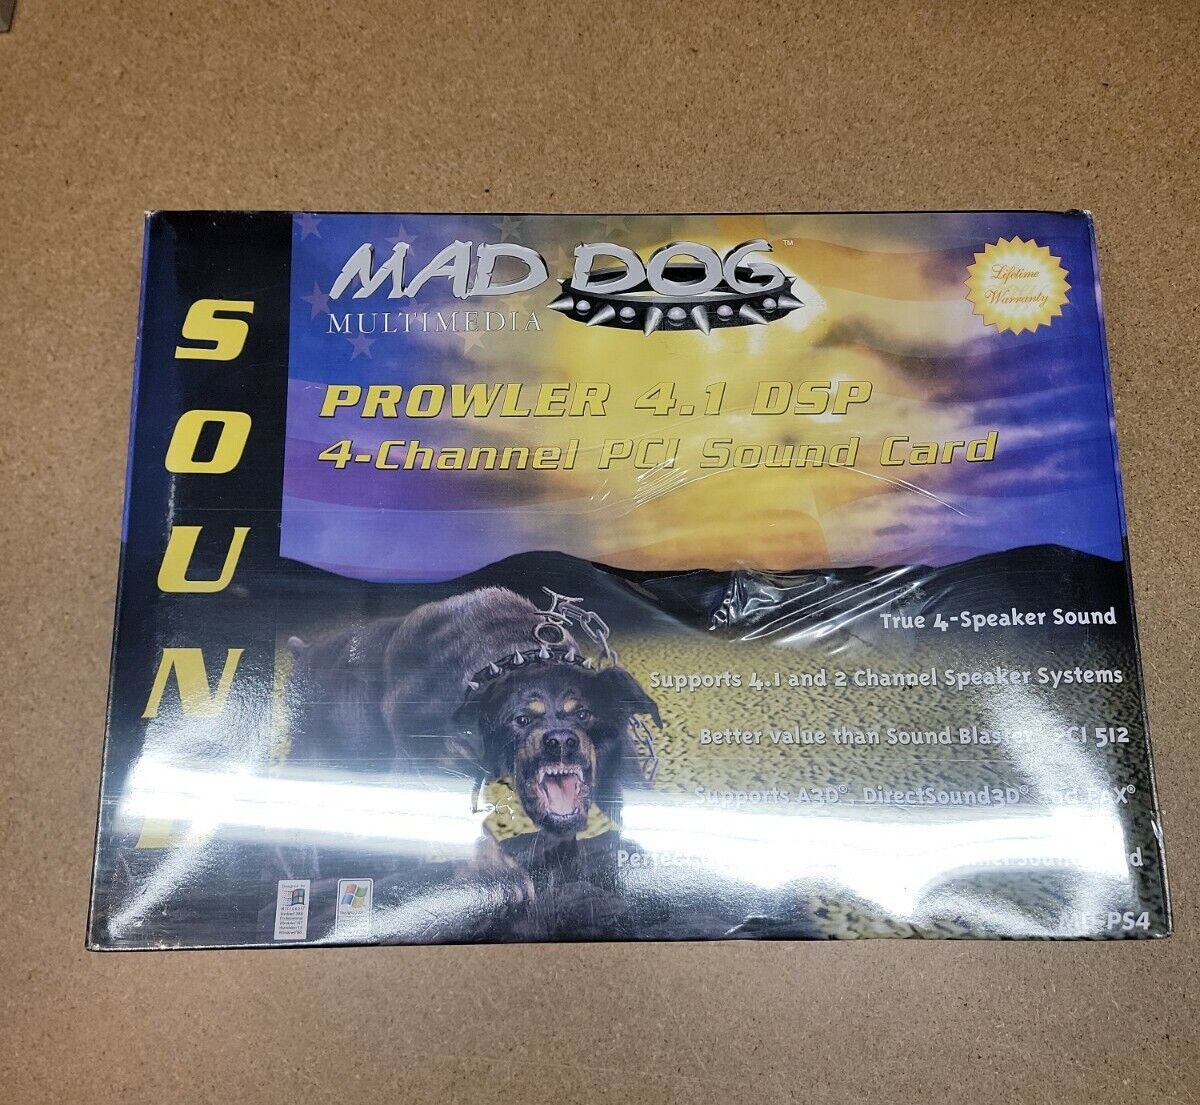 Mad Dog Prowler 4.1 DSP PCI Multimedia Sound Card Sealed Brand New Vintage 